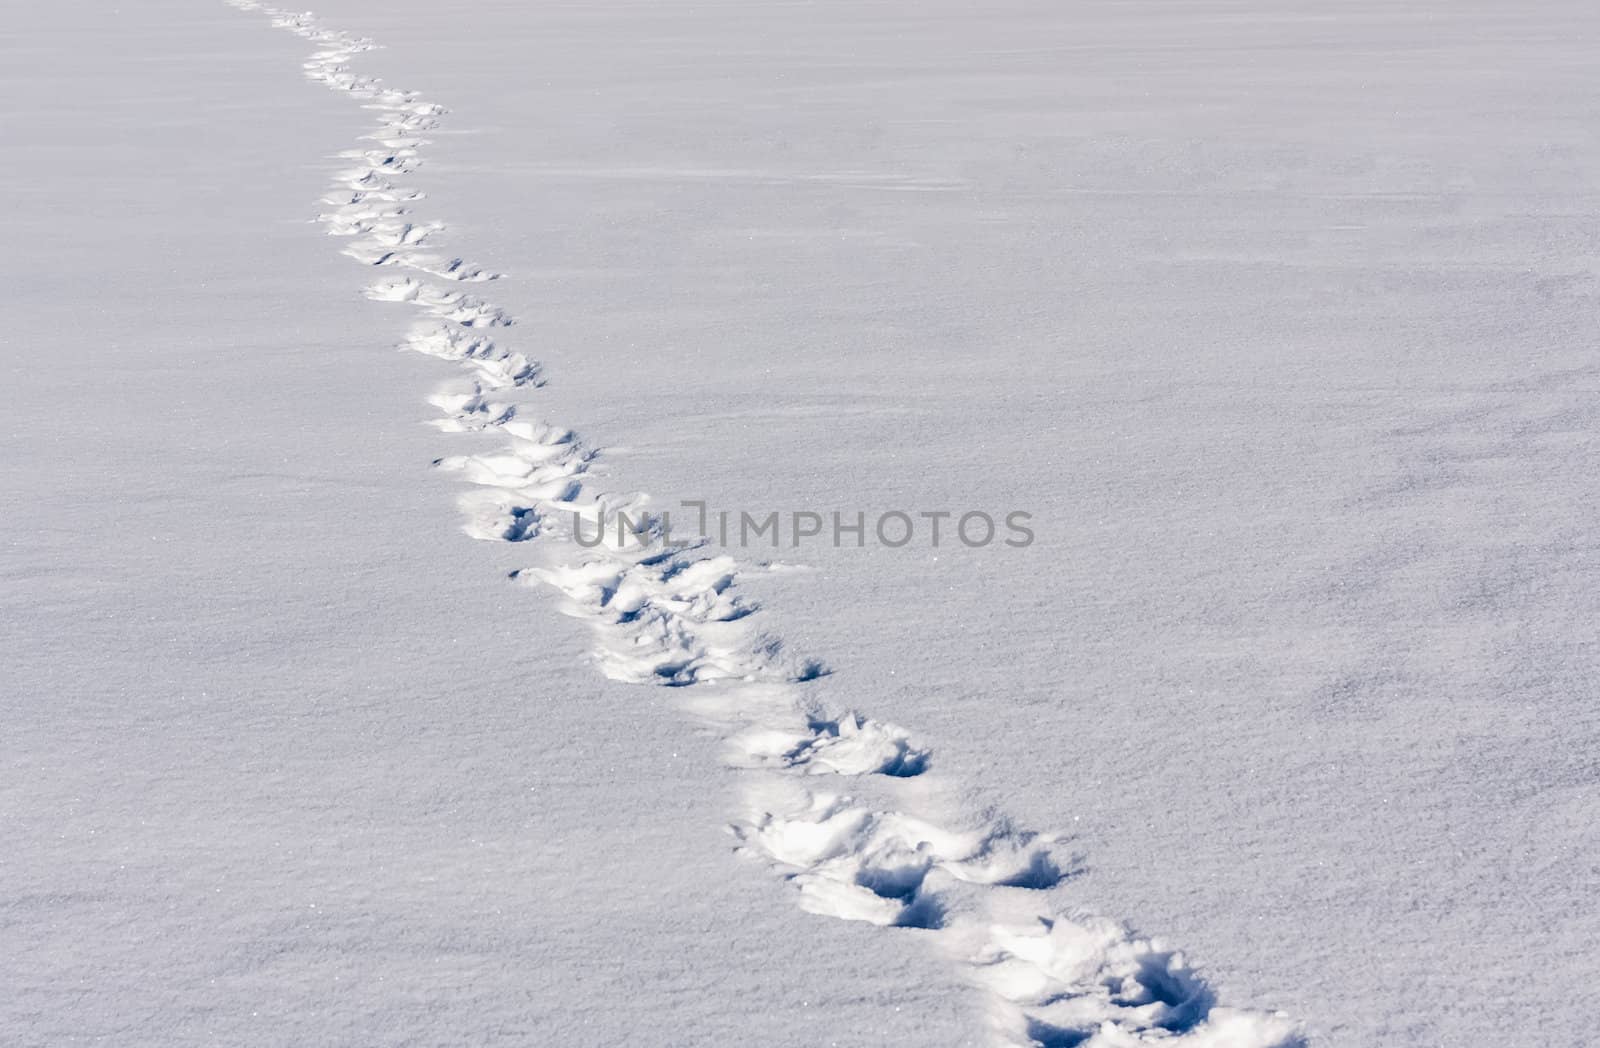 Footsteps On The Snow by ryhor